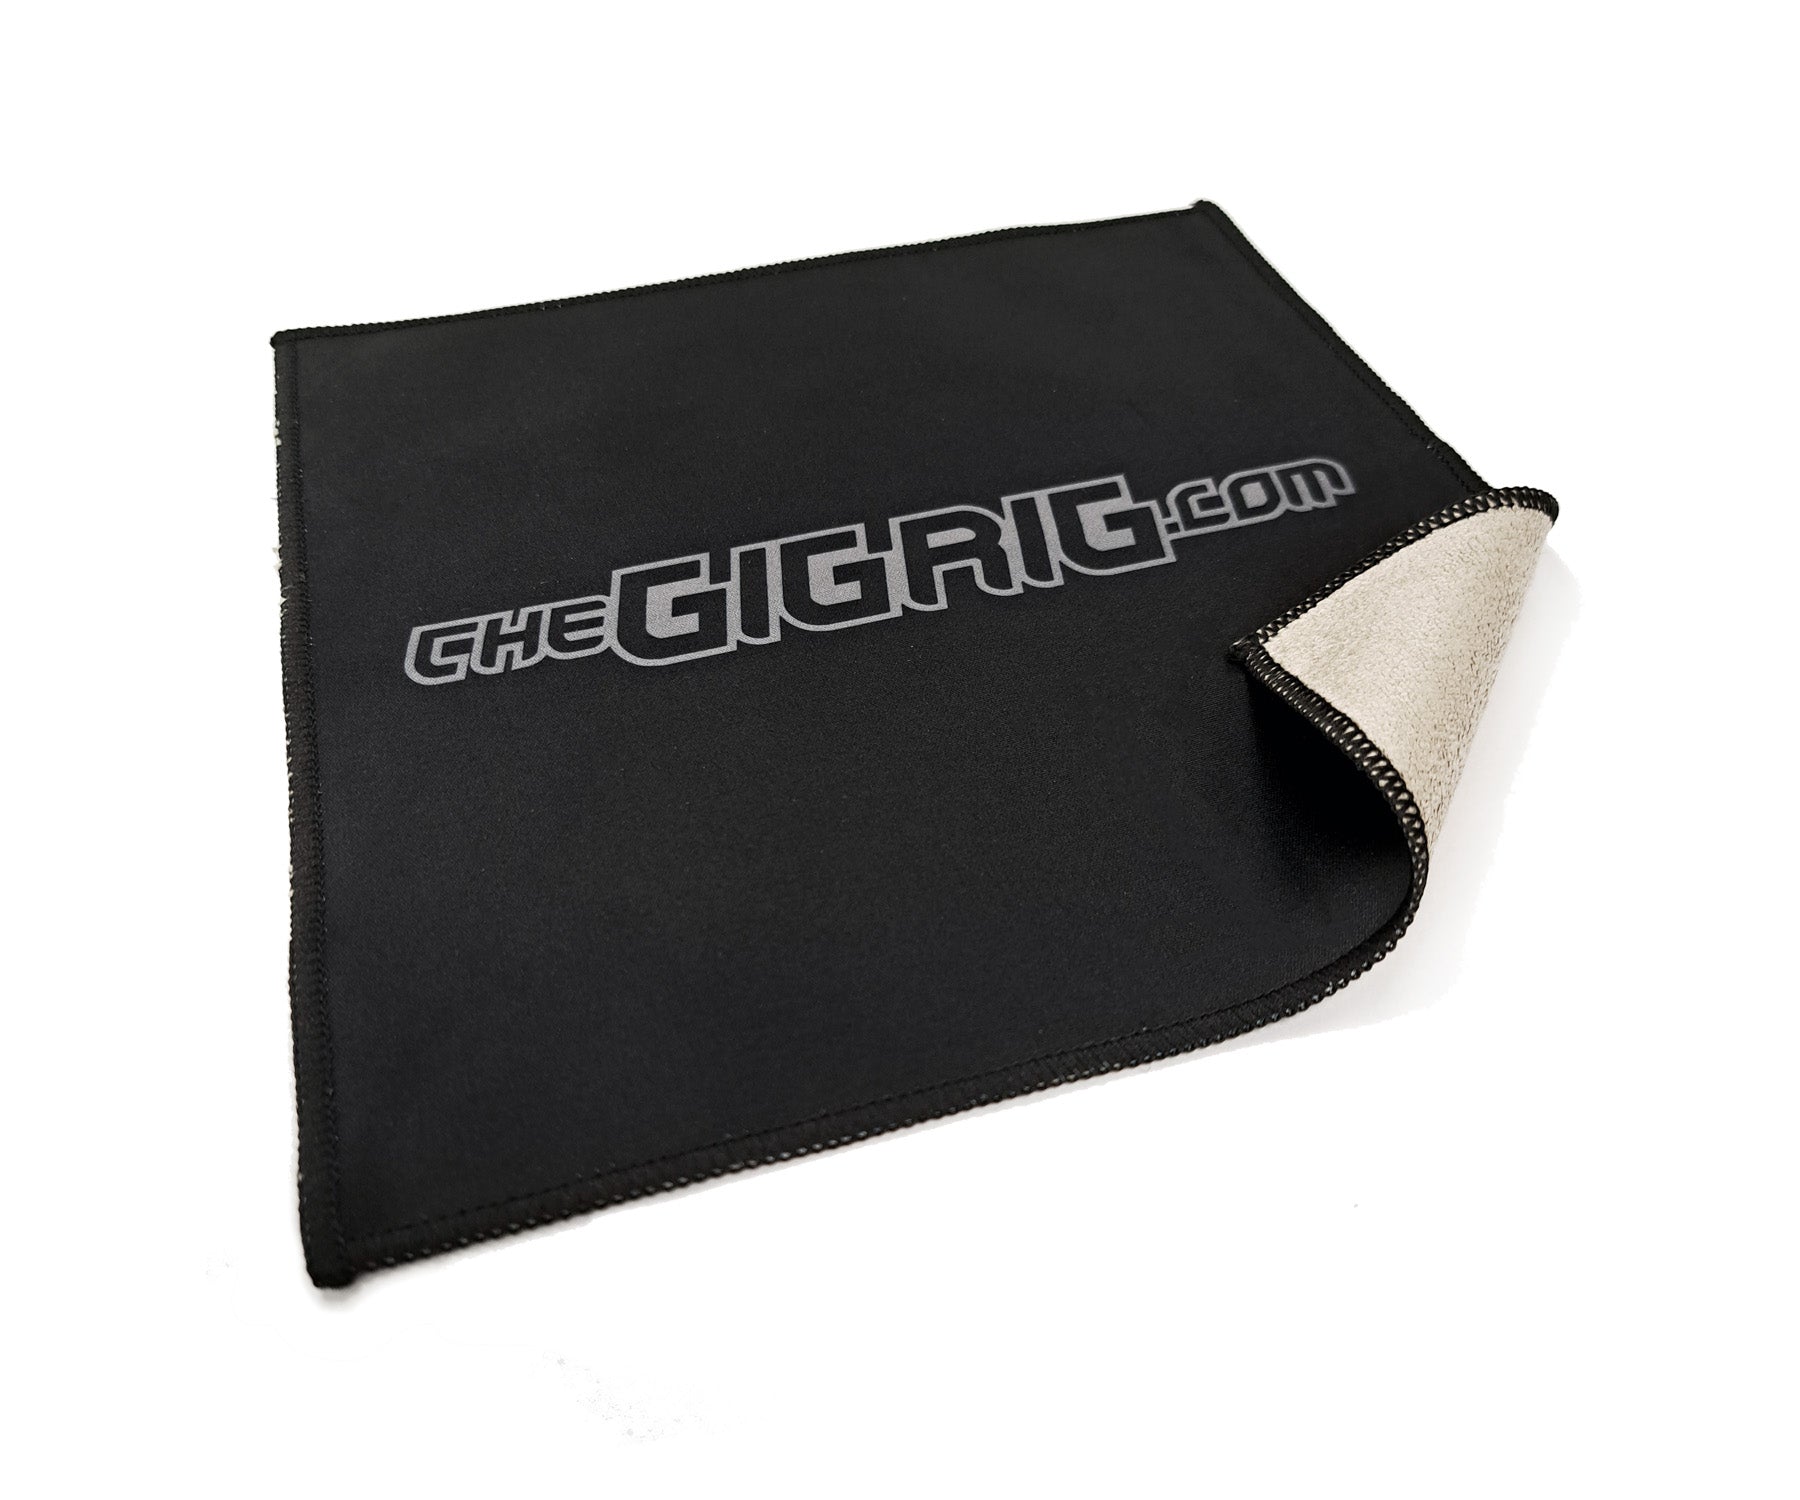 The GigRig Branded Microfibre Cleaning Cloth